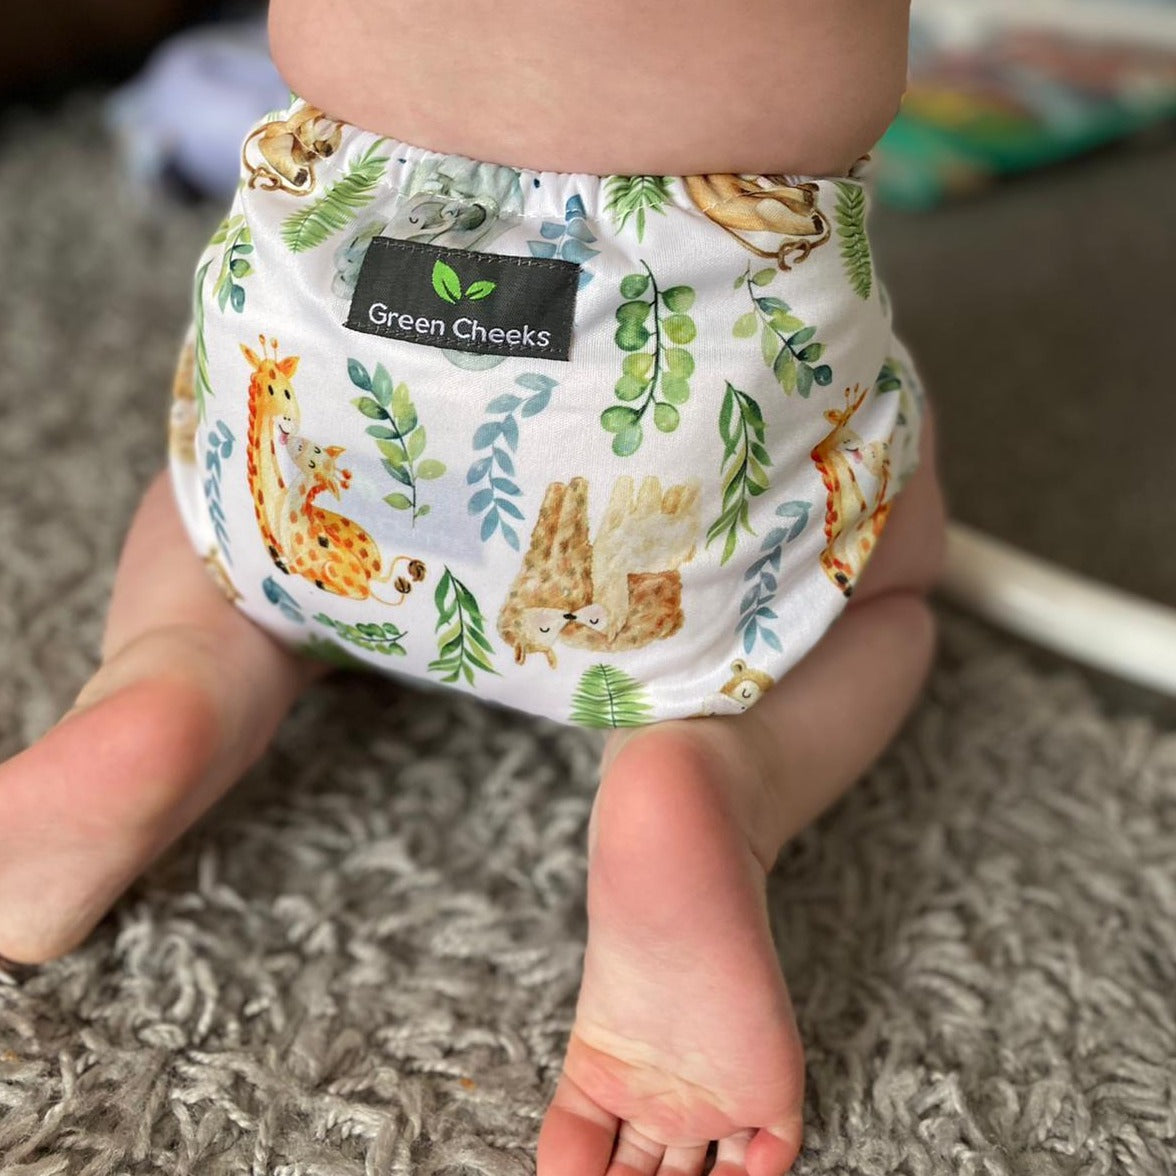 A baby wears a Green Cheeks Reusable Nappy. It has sleeping animals on the pattern.